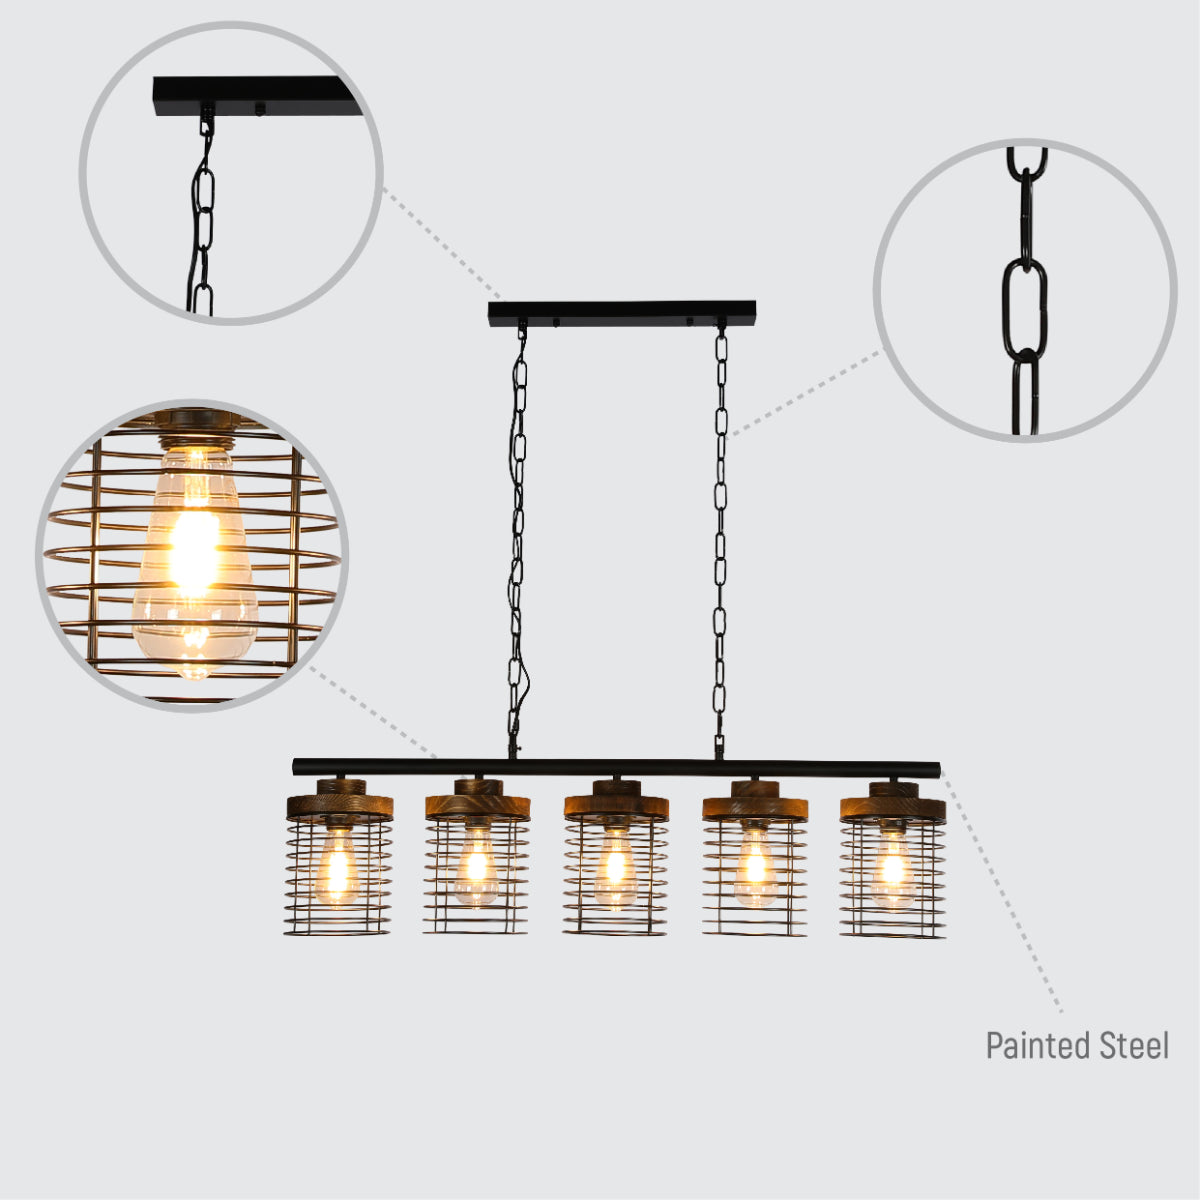 Lighting properties of Industrial Cage Pendant Light - Rectangular 5-Shade Linear Chandelier with Wood Accents 150-19066